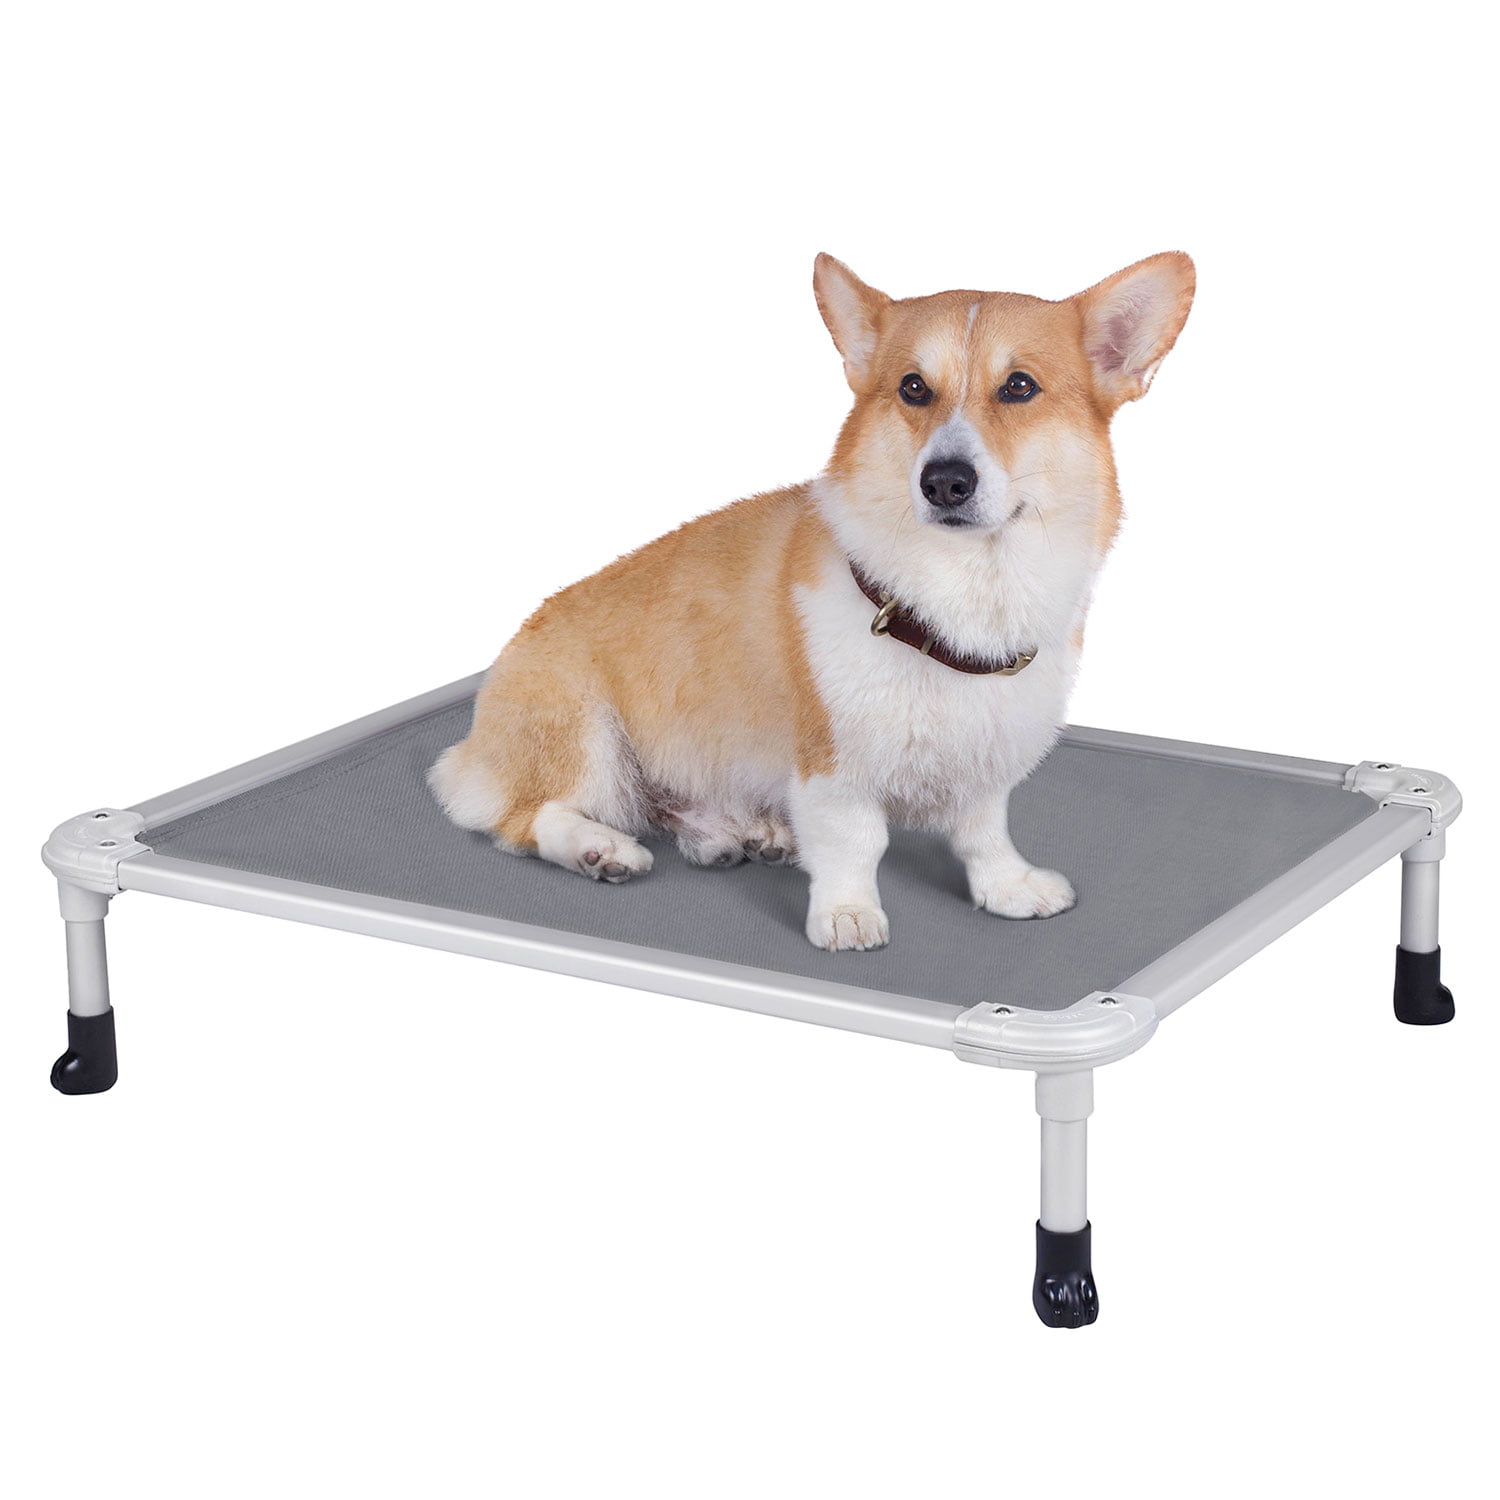 Cooling Raised Pet Cot Silver Aluminum Frame and Durable Textilene Mesh Fabric Unique Designed No-Slip Feet for Indoor or Outdoor Use Veehoo Chew Proof Elevated Dog Bed 